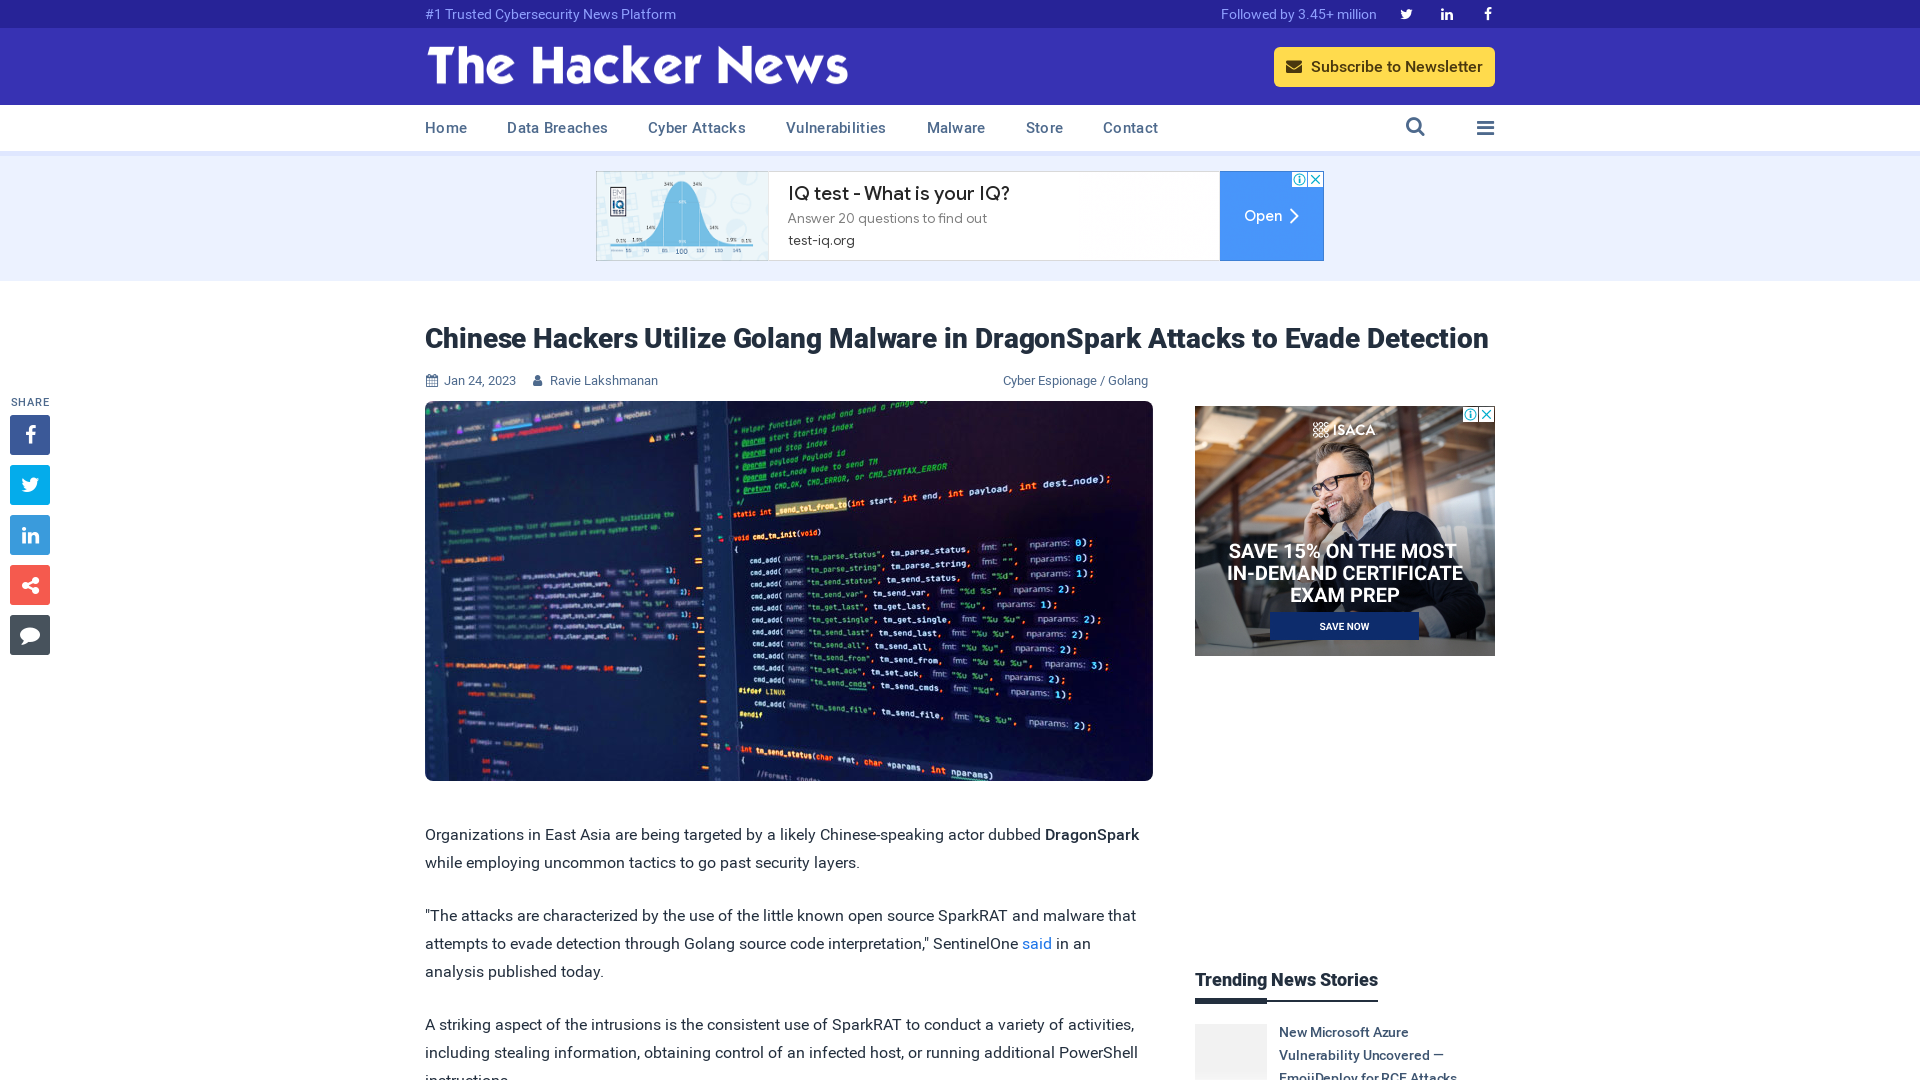 Chinese Hackers Utilize Golang Malware in DragonSpark Attacks to Evade Detection